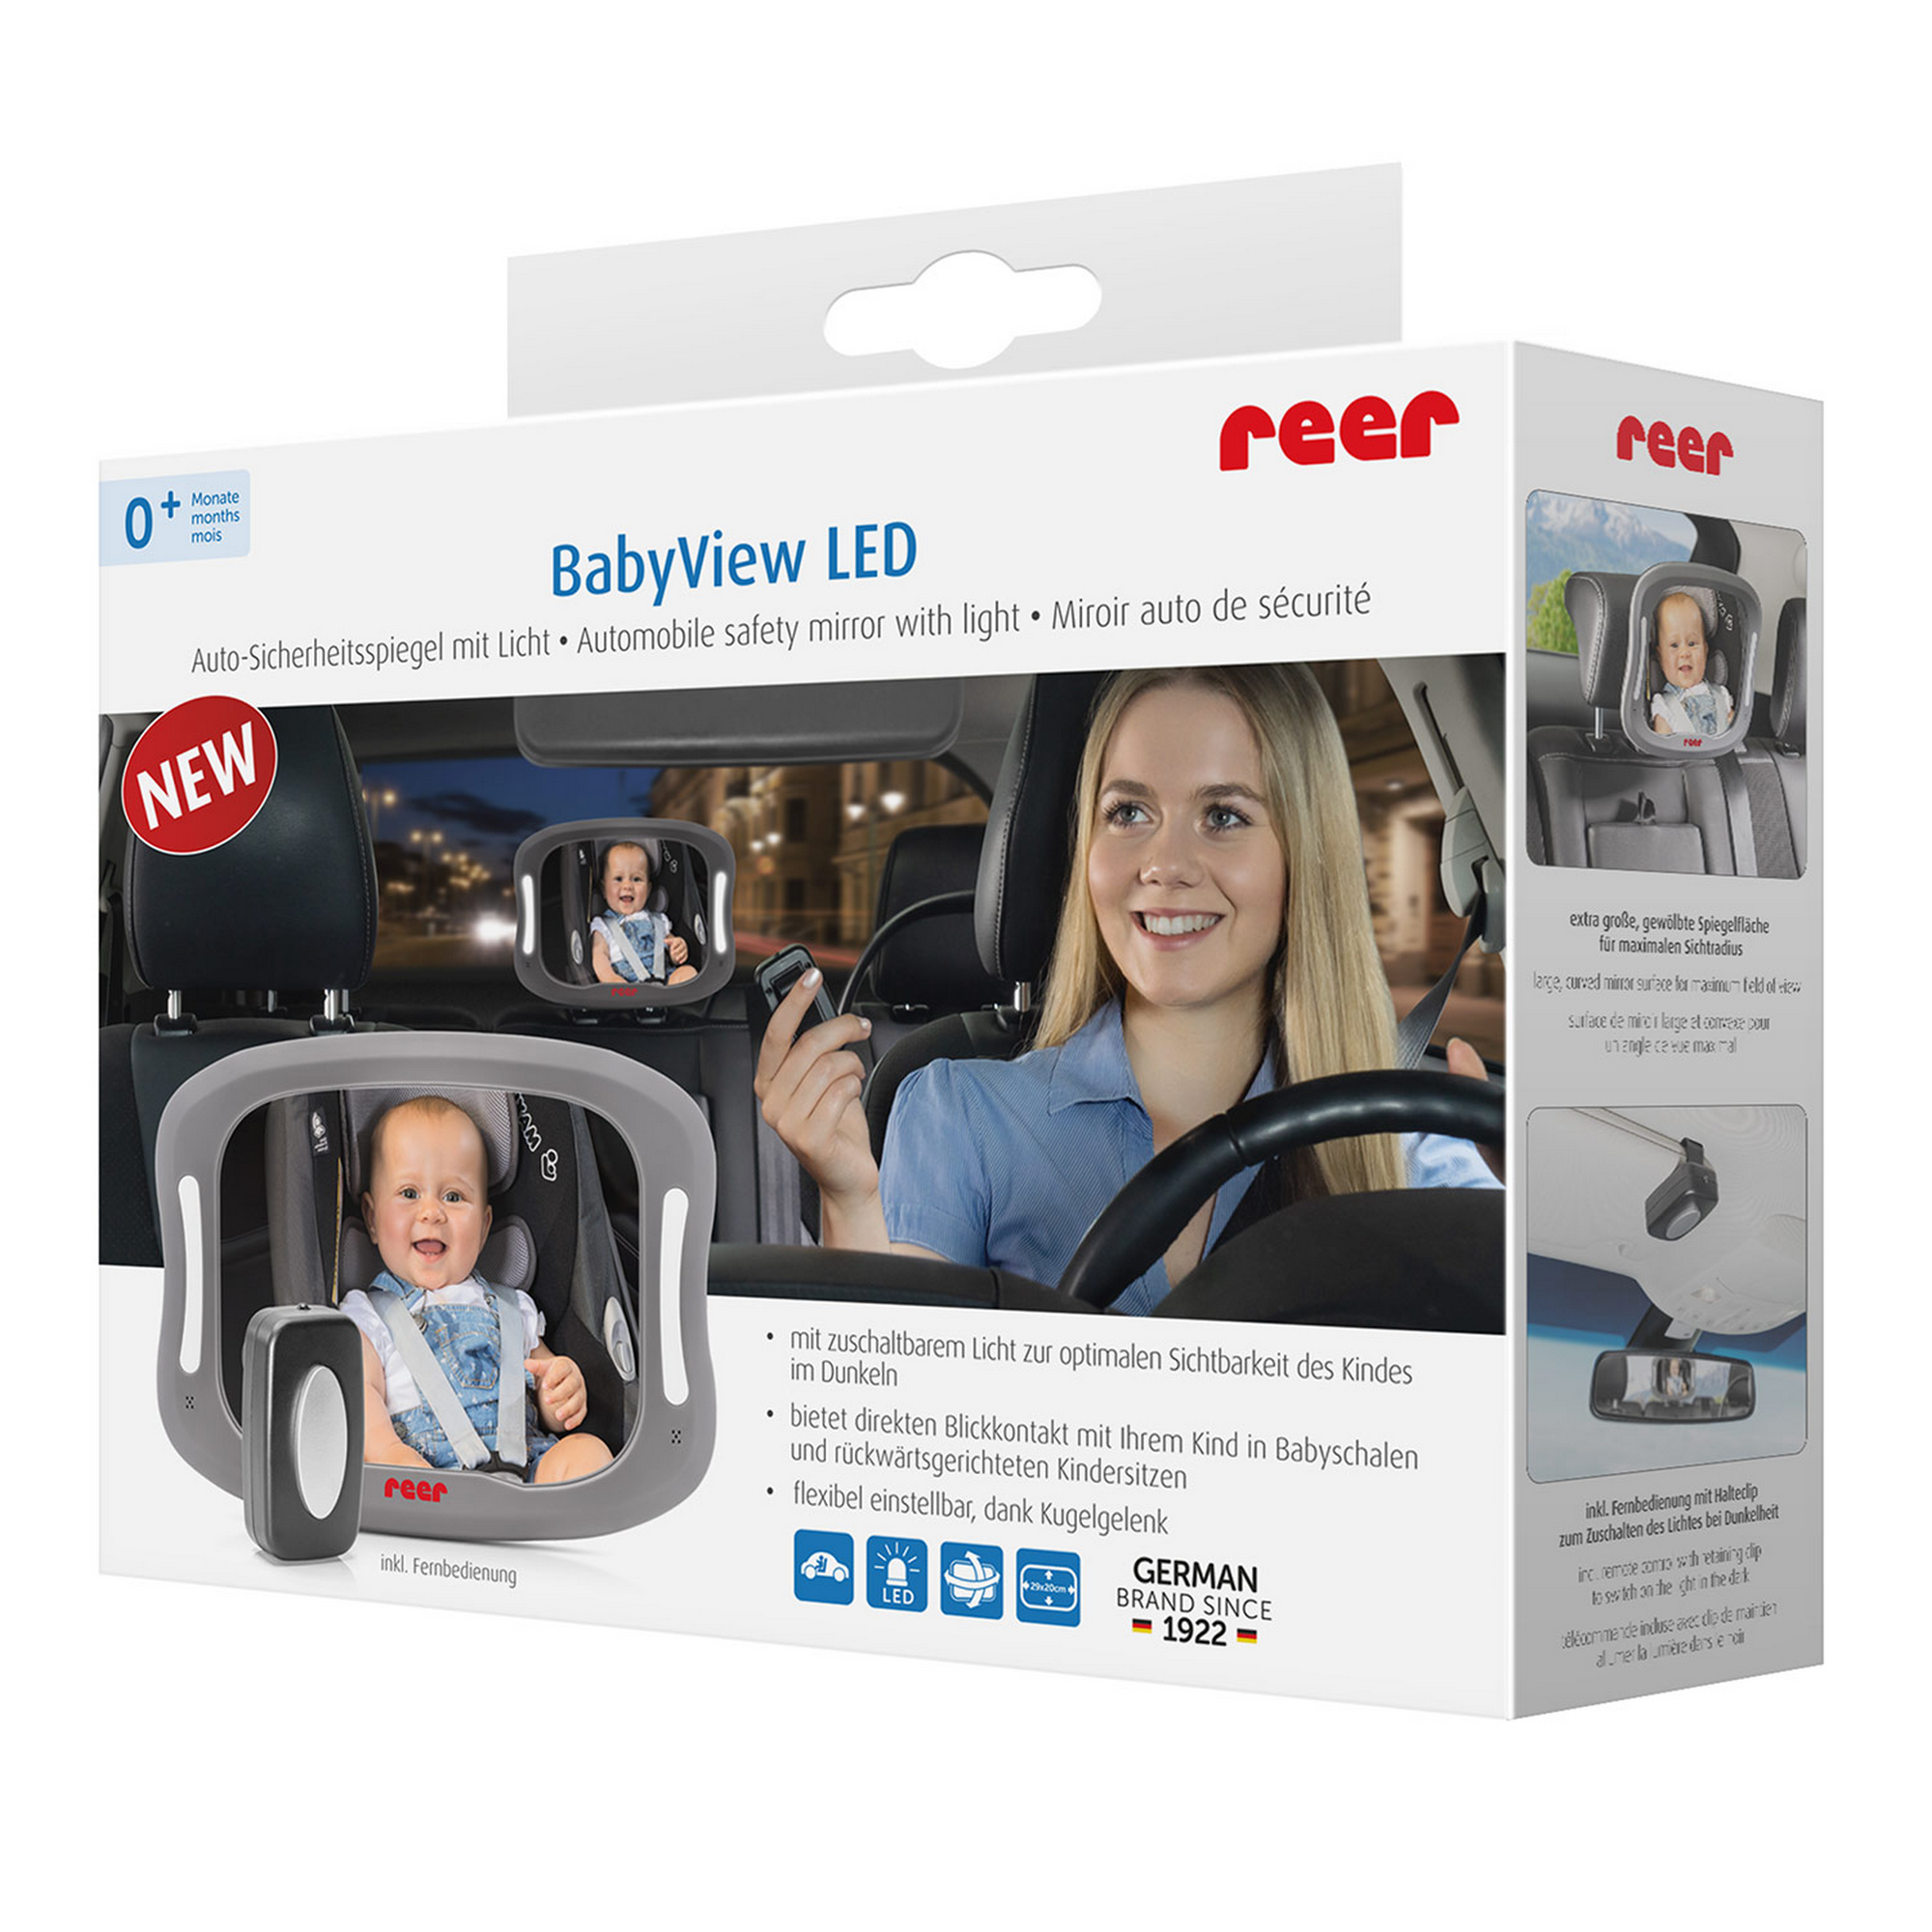 LED-Auto-Sicherheitspiegel 'Baby View' + product picture